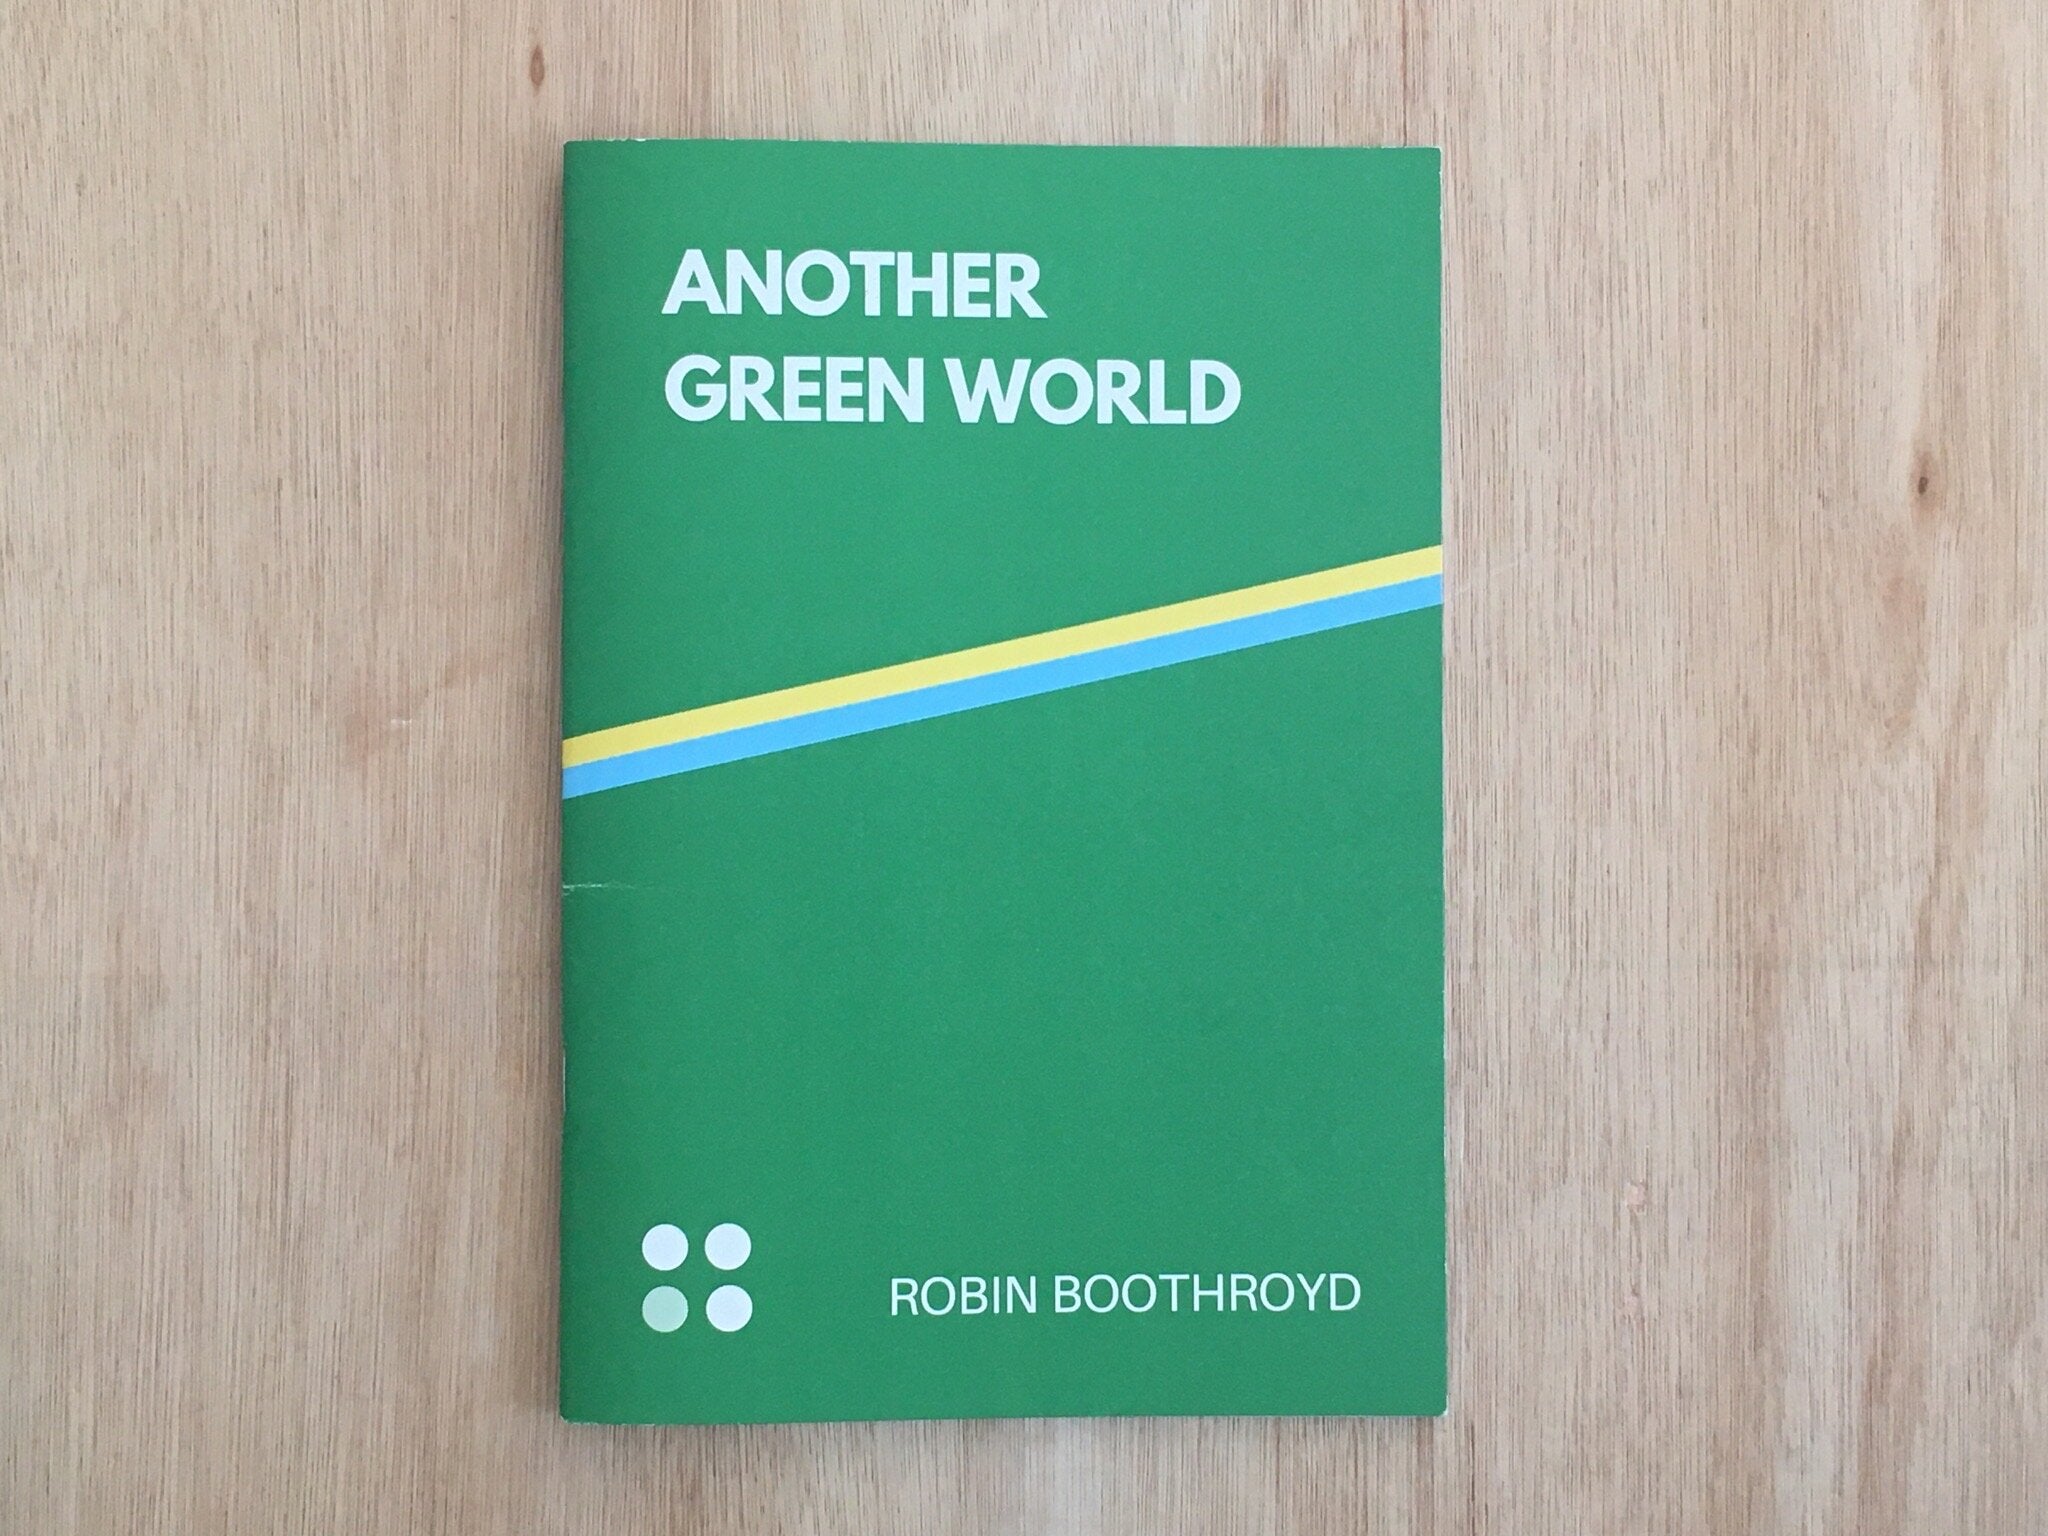 ANOTHER GREEN WORLD by Robin Boothroyd